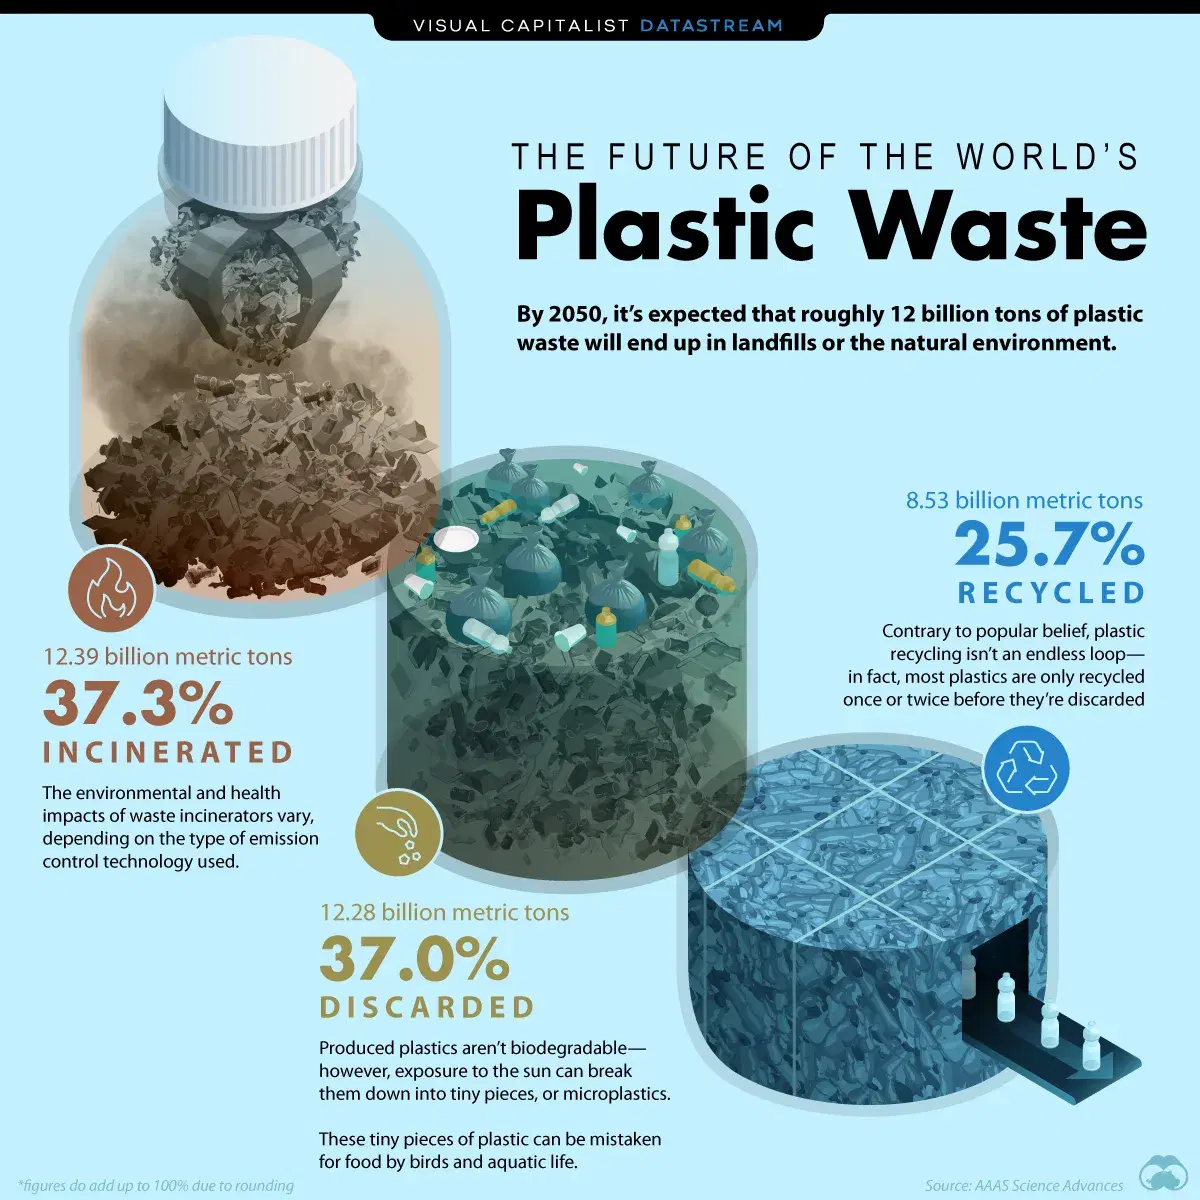 Here’s Where the World’s Plastic Waste Will End Up, by 2050